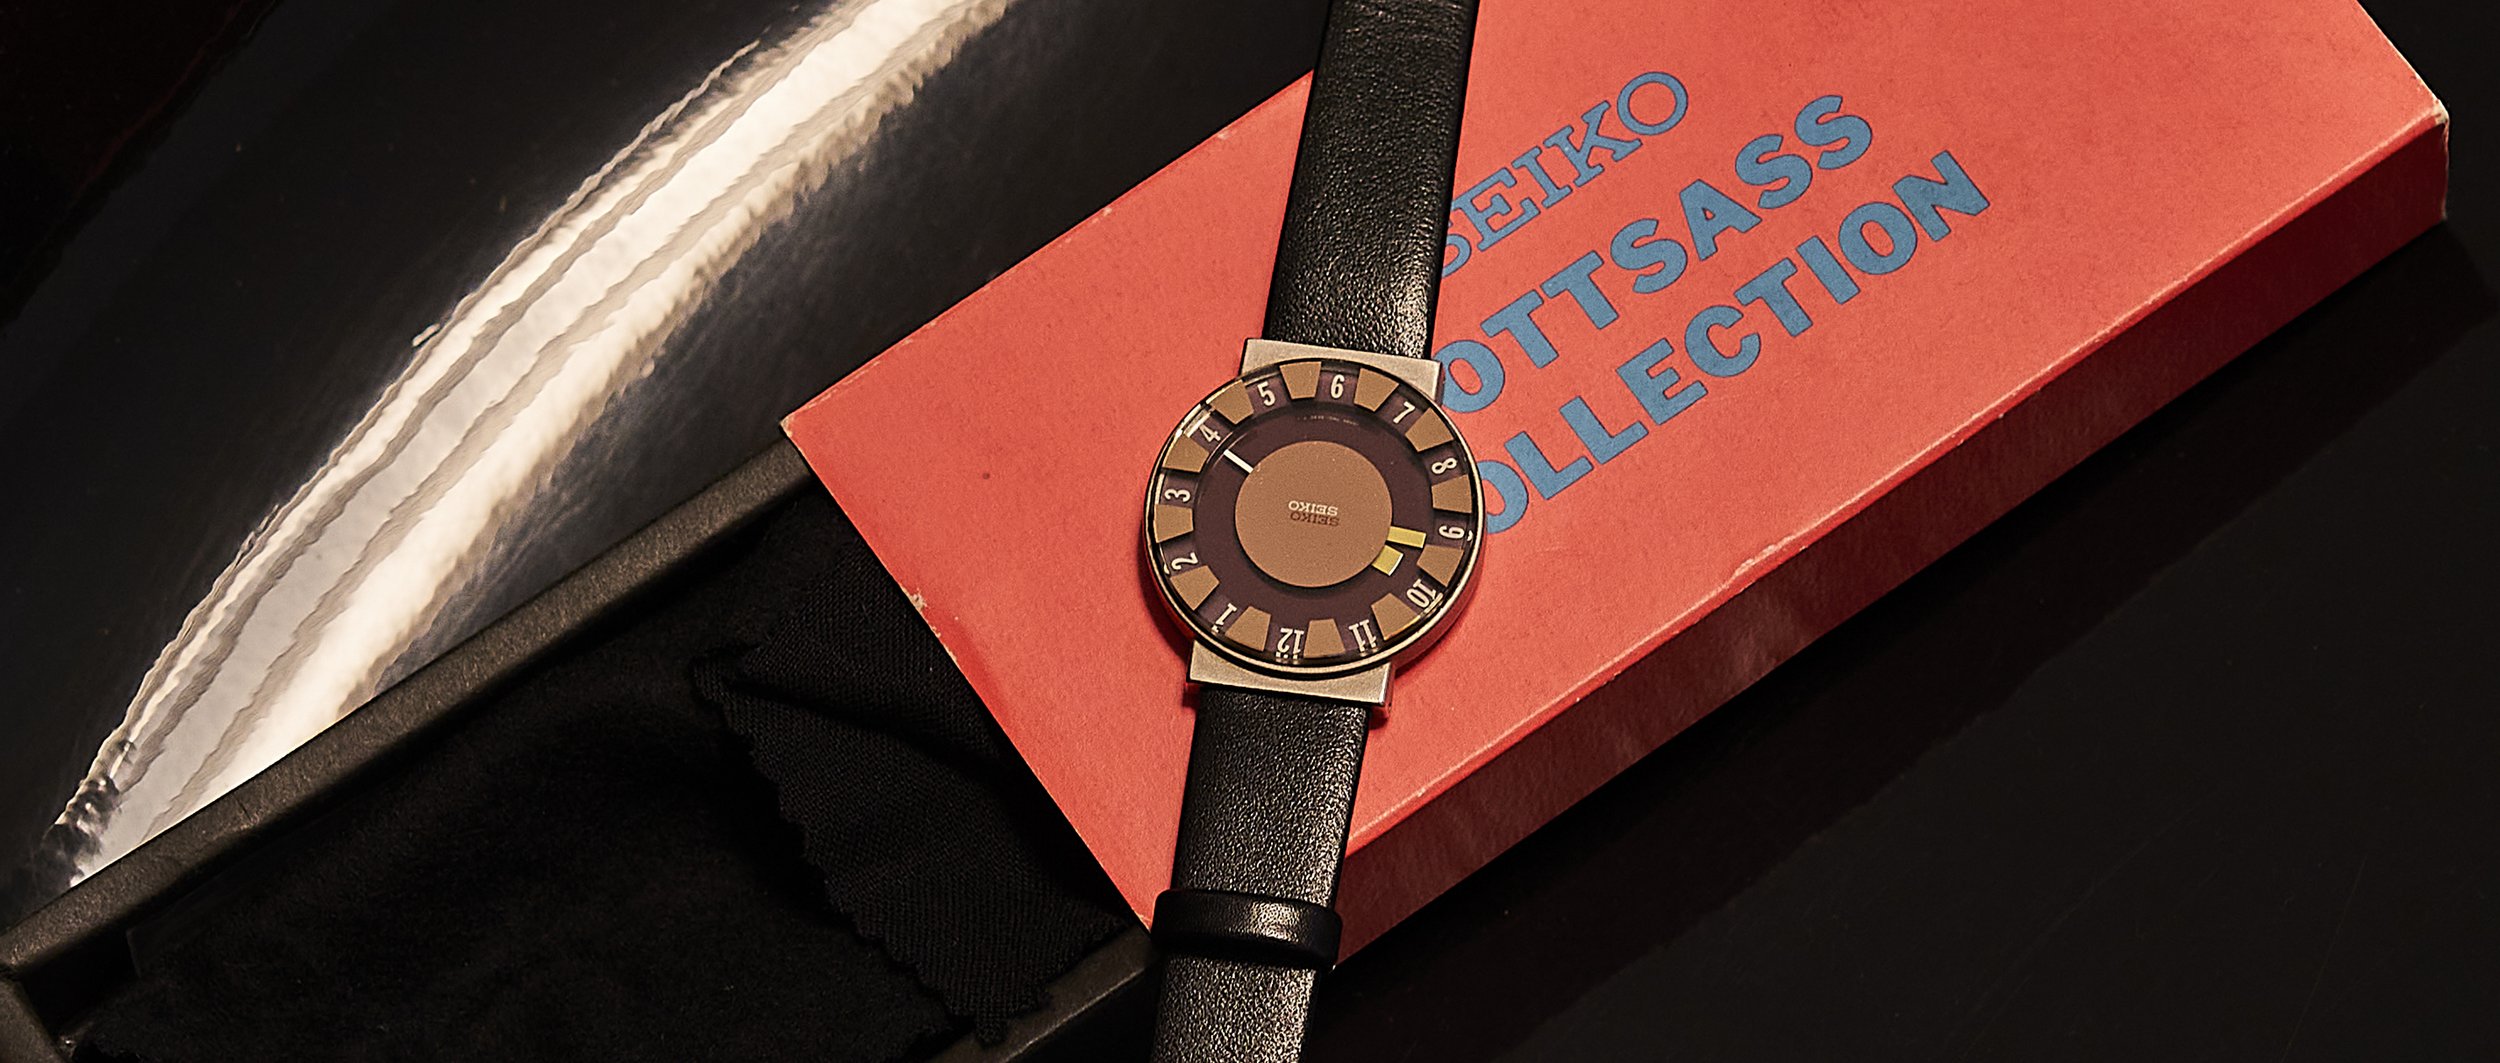 Collector Ettore Sottsass Wristwatch by watchmaker Seiko — The Exchange Int